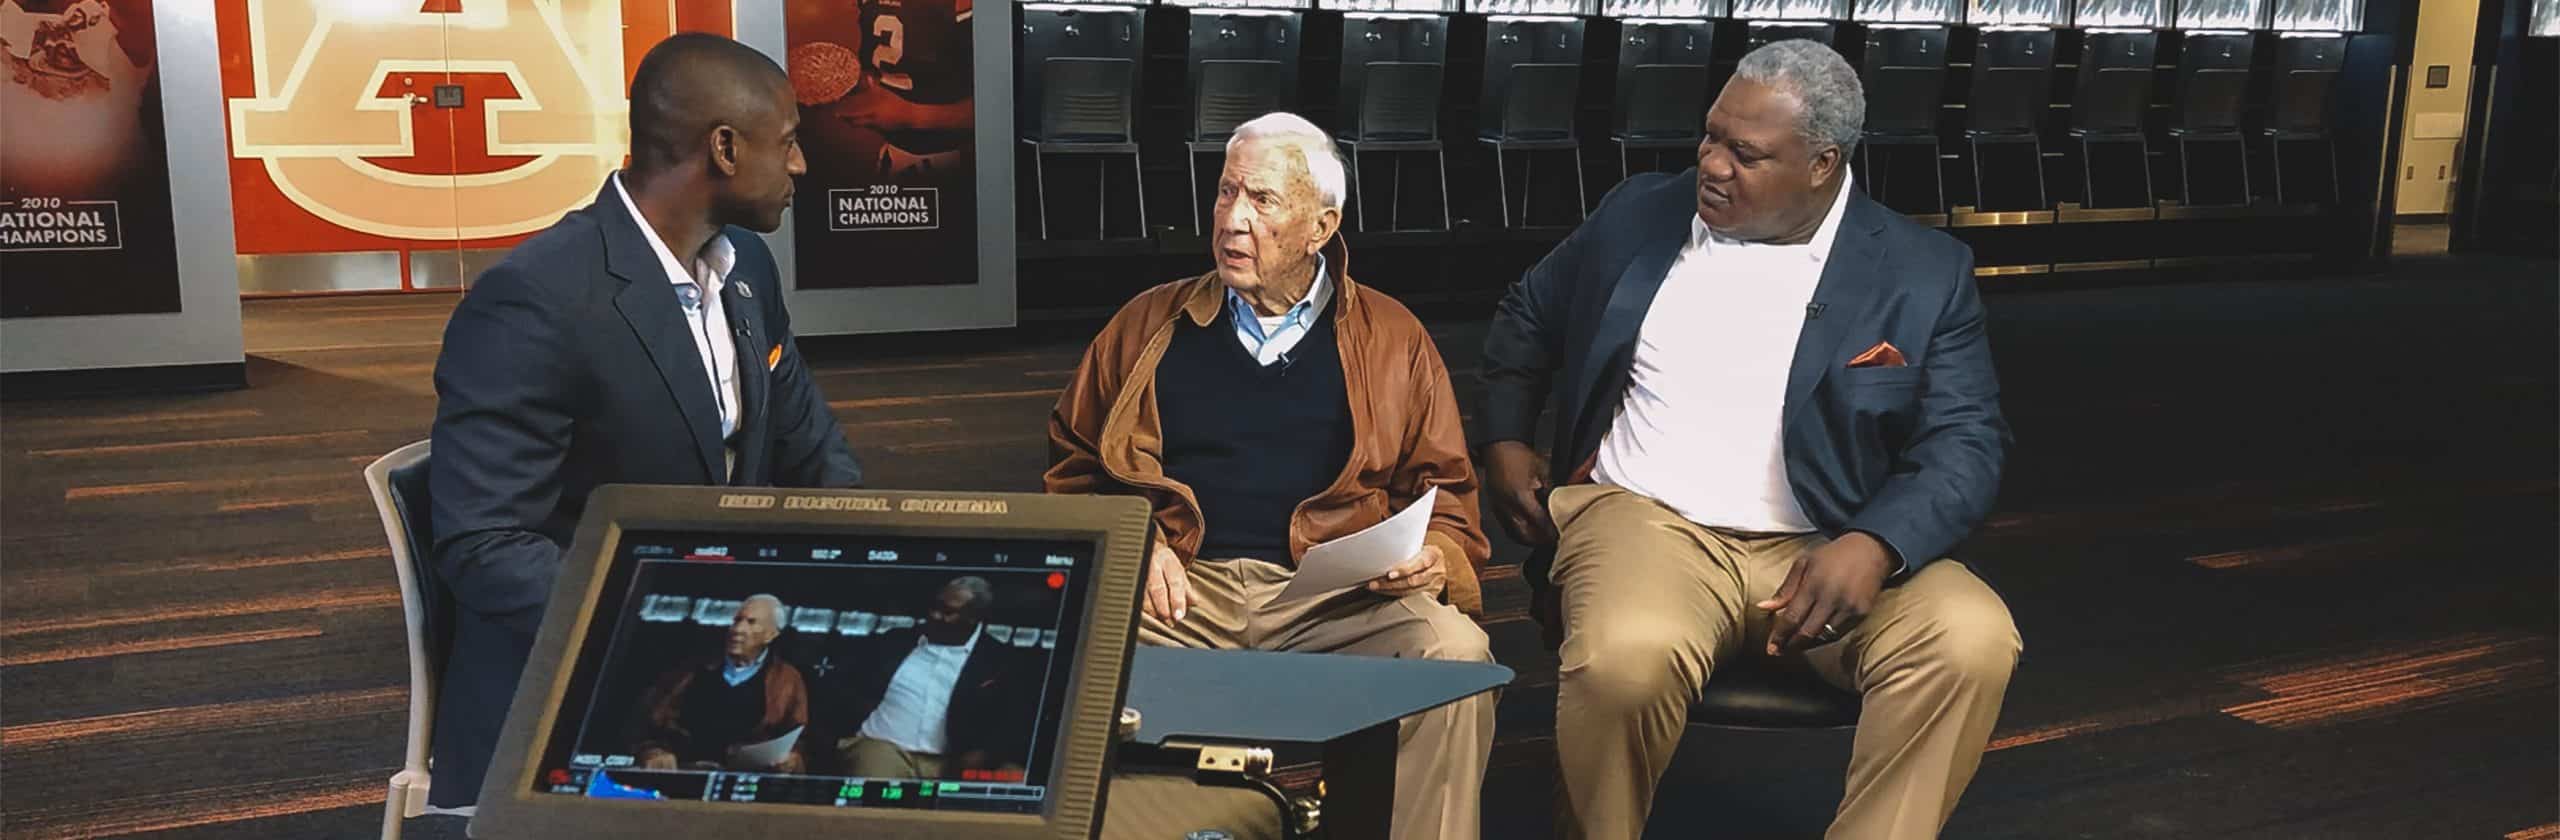 Our Day with Coach Dye: A Spirit That Was Not Afraid